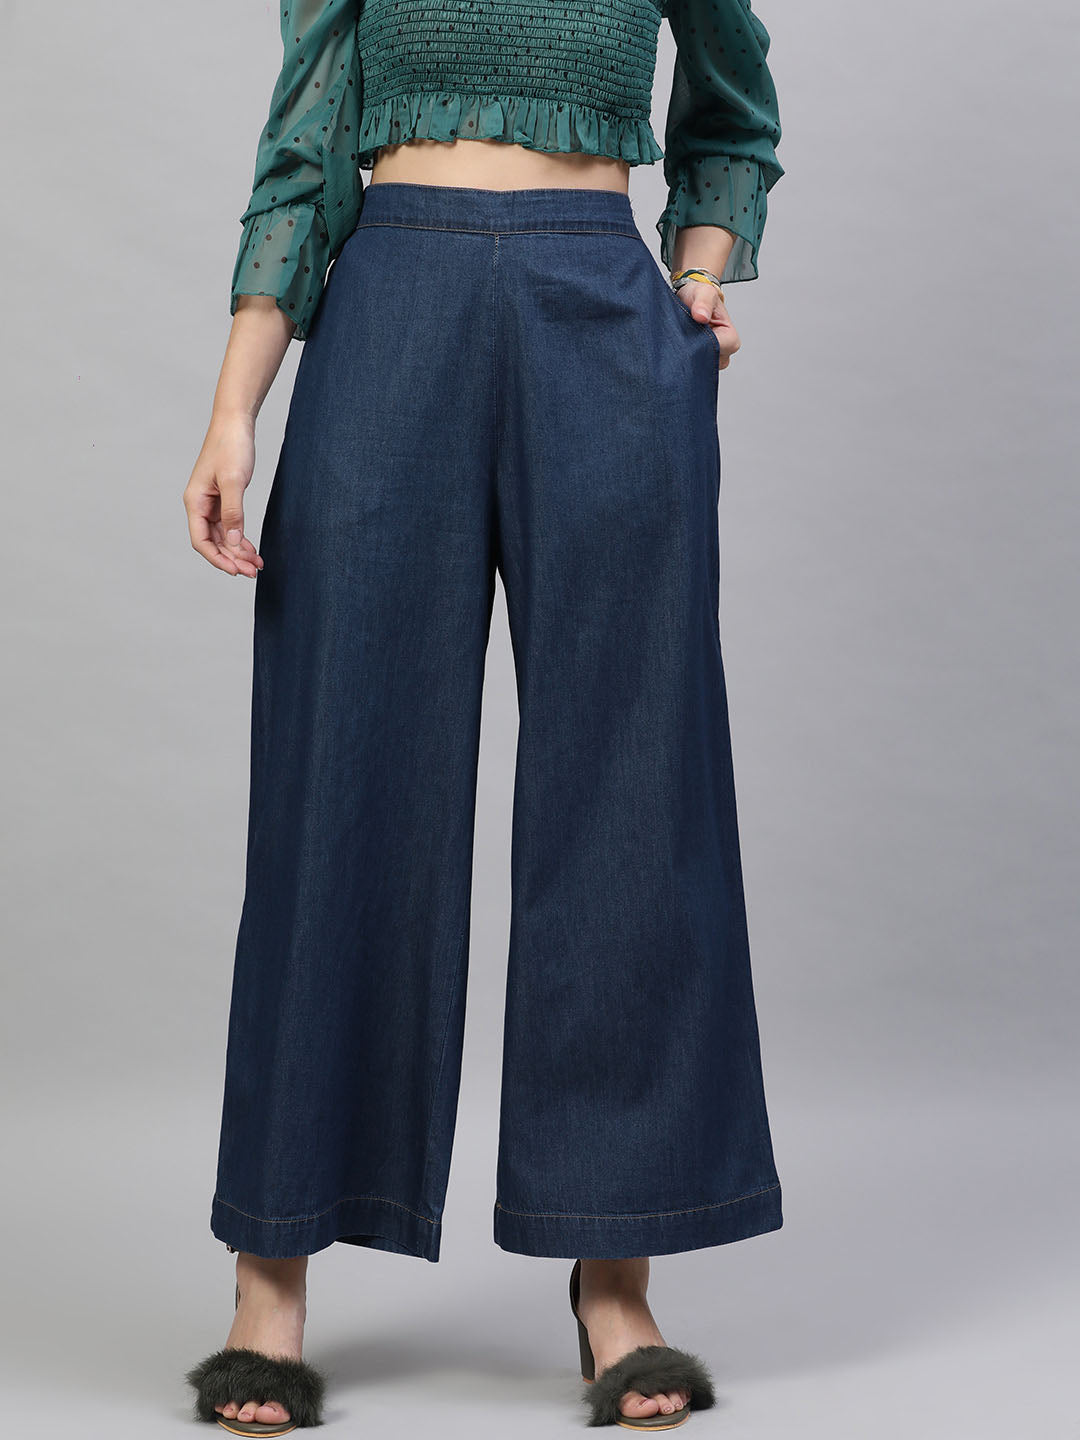 NIUREDLTD Wide Leg Baggy Denim Pants For Women High Wasit Button Closure  With Zip Fly Lace Up Straight Leg Jeans With Pockets And Belt Blue M -  Walmart.com